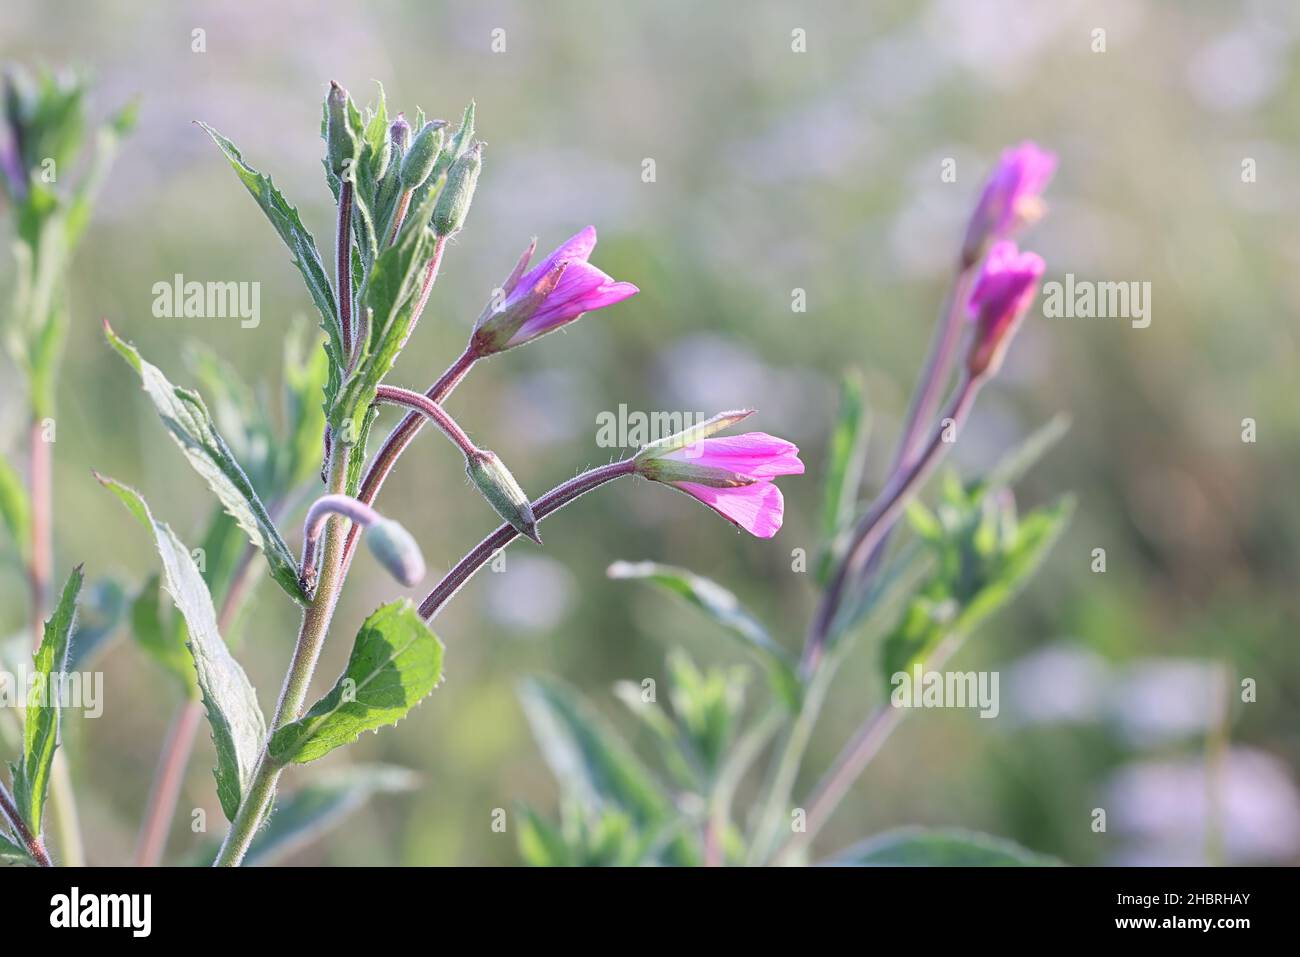 Epilobium hirsutum, commonly known as the great willowherb, great hairy willowherb or hairy willow-herb, wild plant from Finland Stock Photo